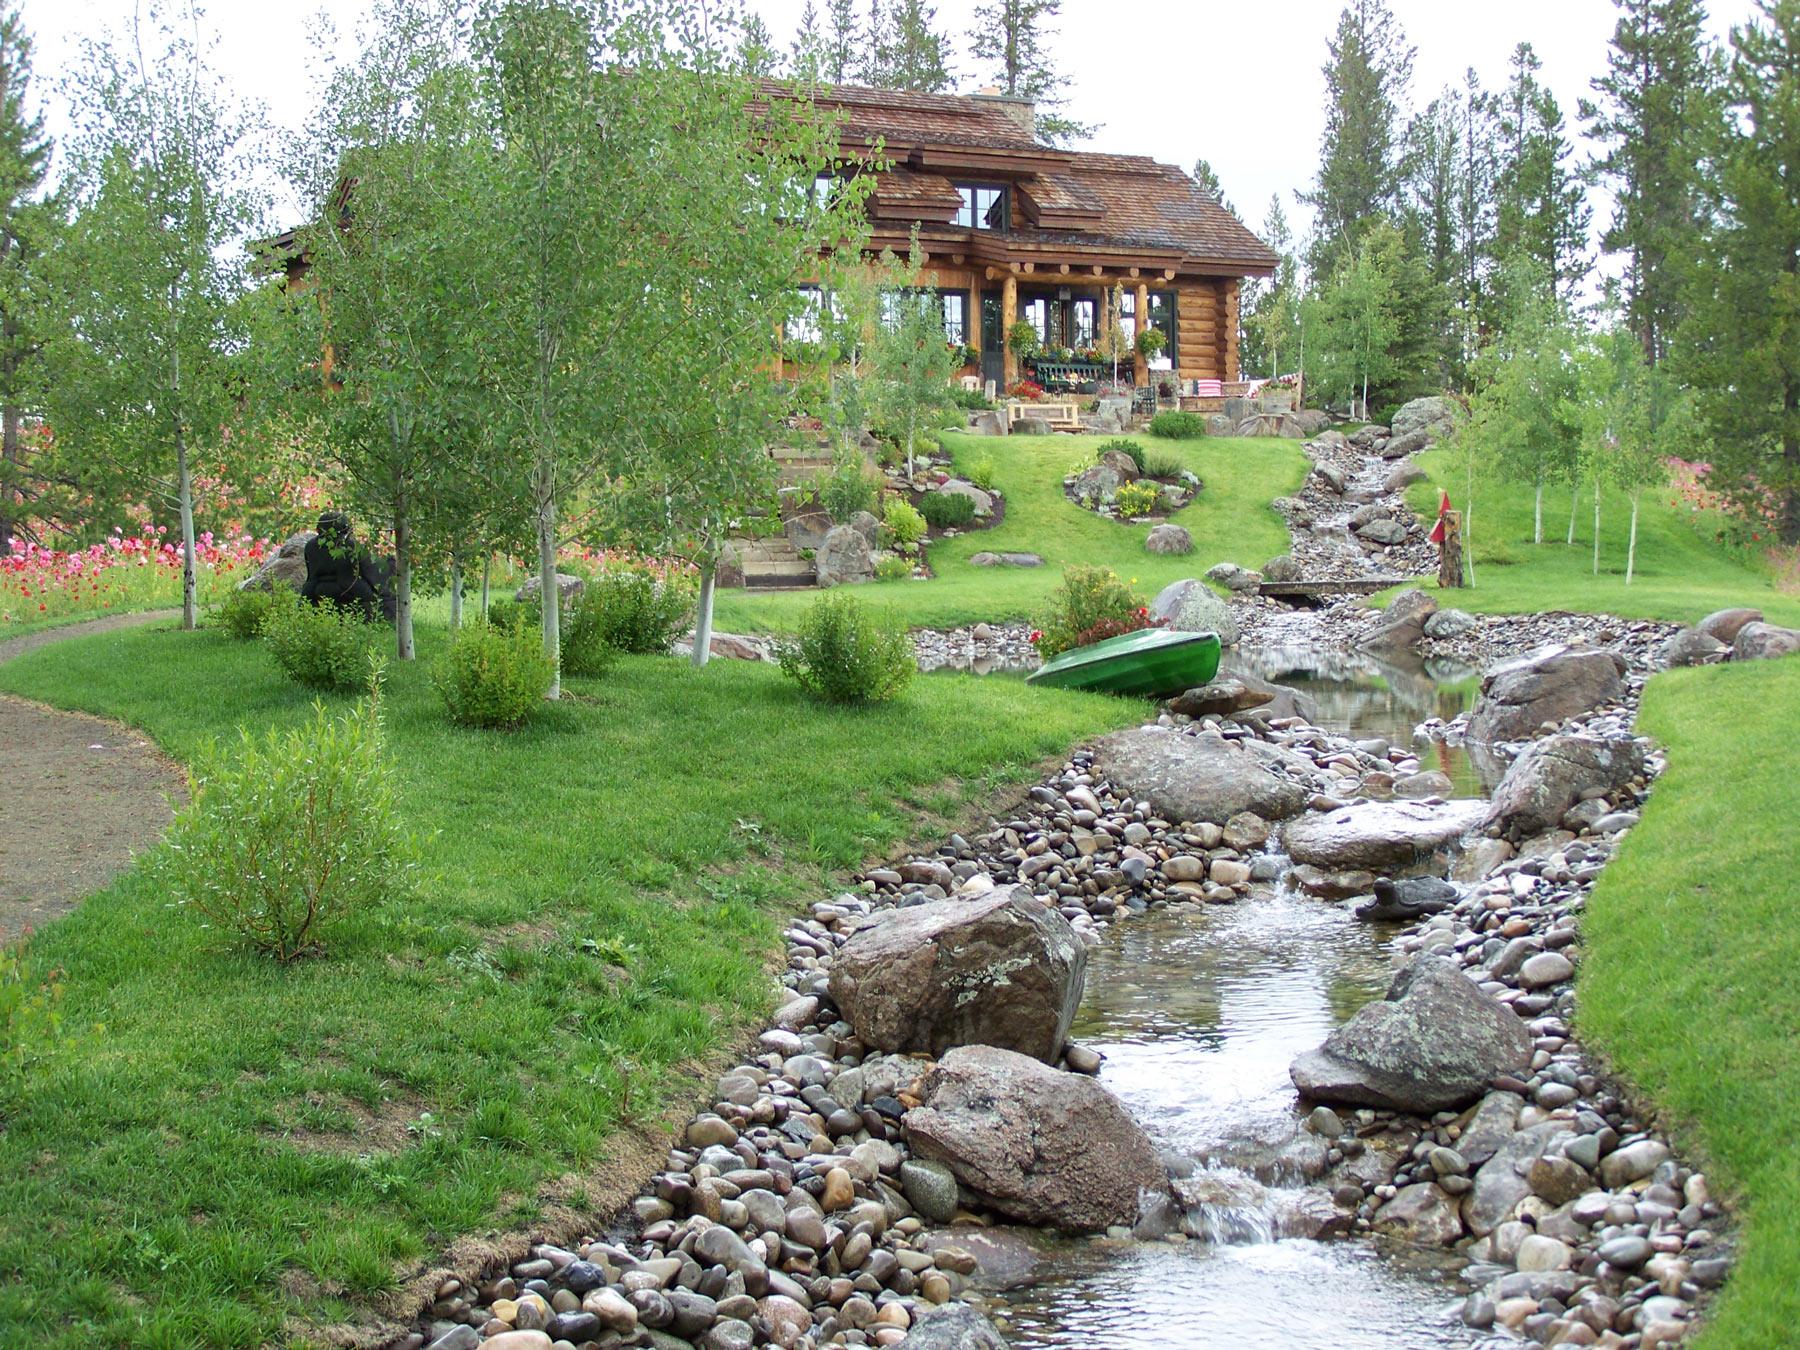 Clearwater Landscaping | landscape construction | Sun Valley, Hailey, Ketchum, Idaho